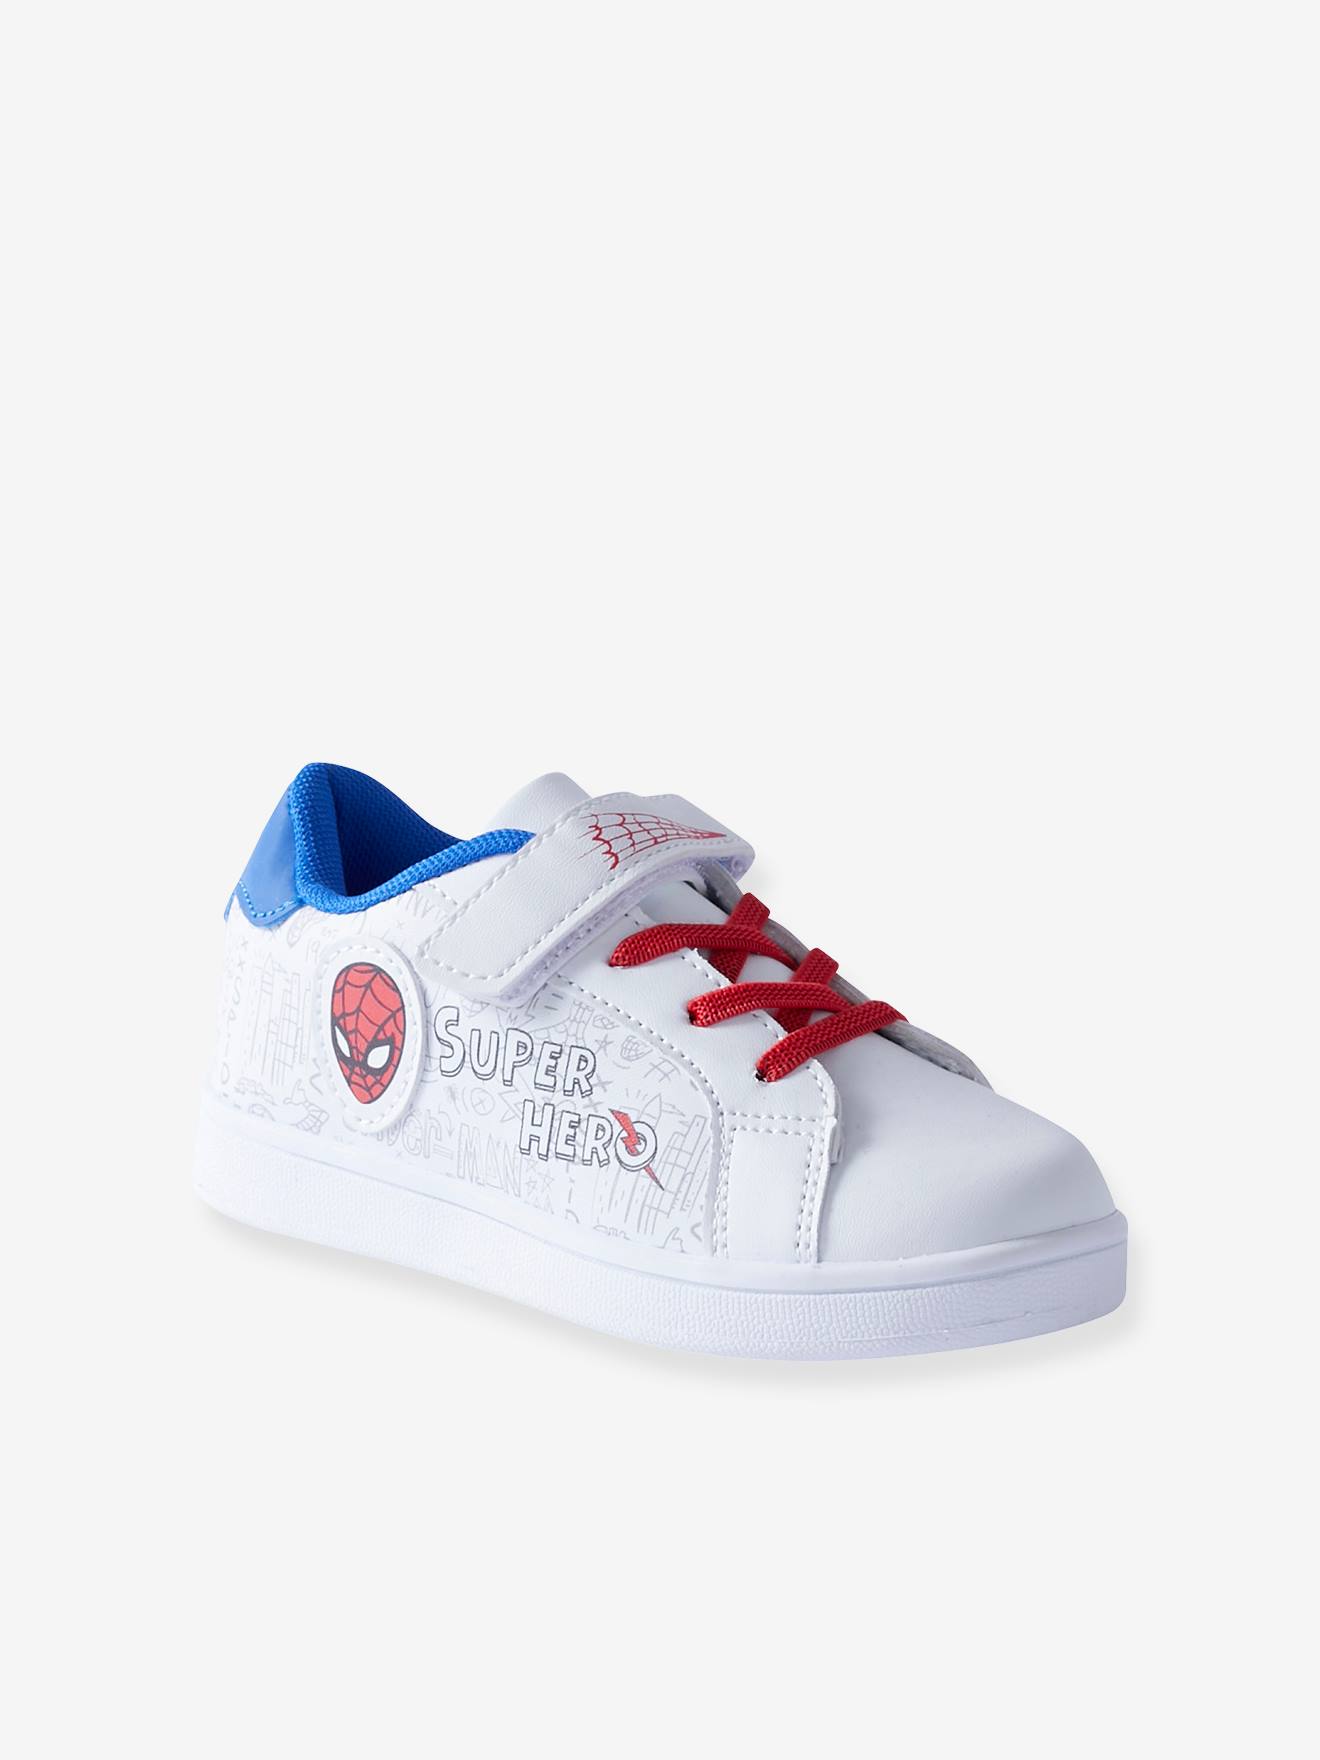 Marvel(r) Spider-Man Low Top Trainers for Boys white